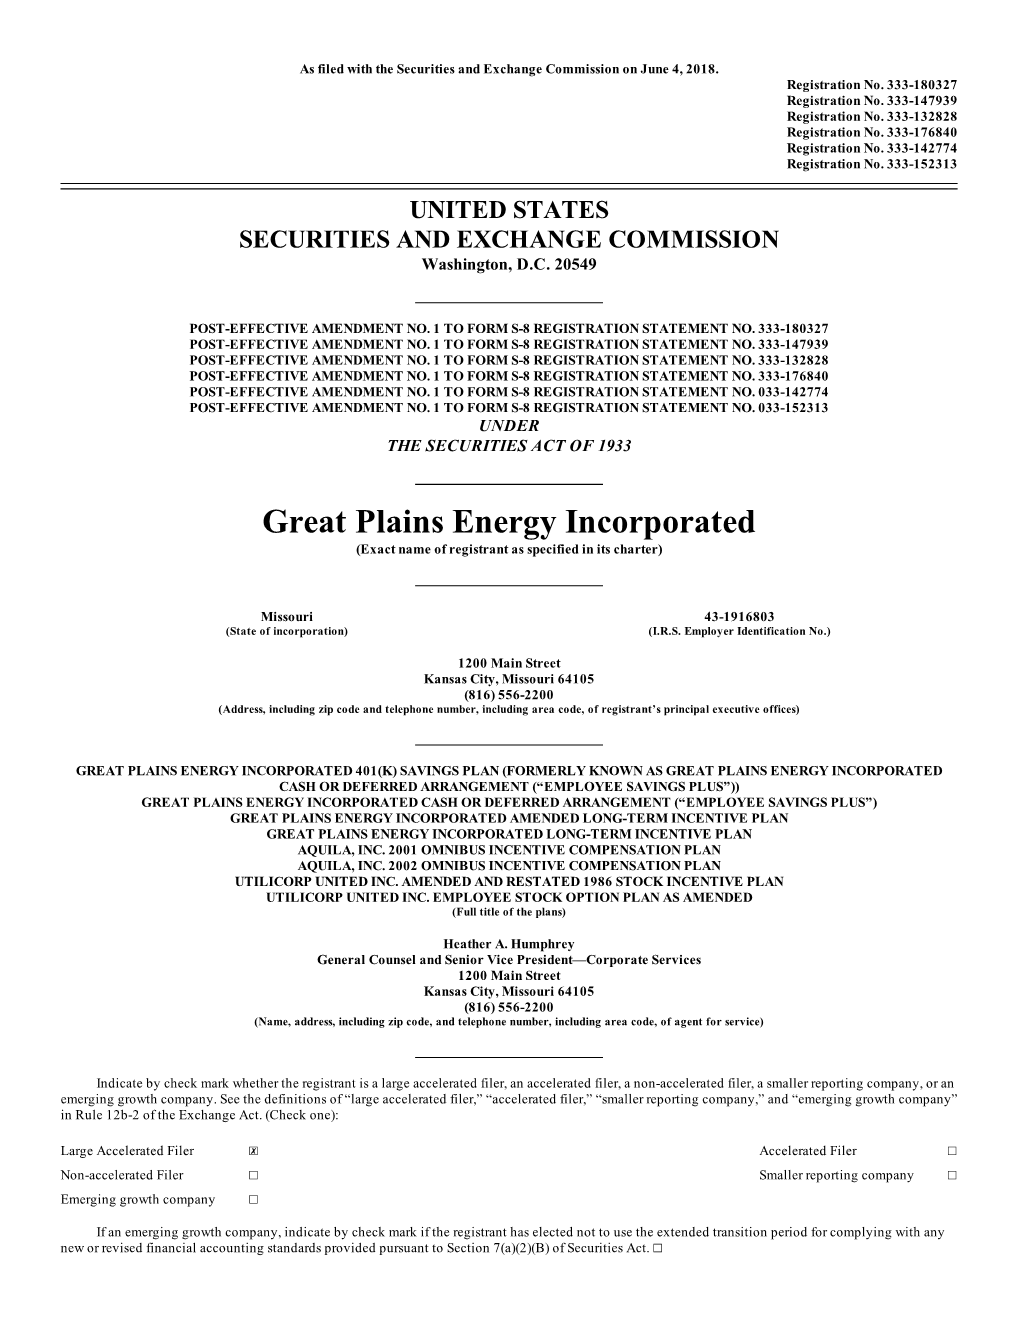 Great Plains Energy Incorporated (Exact Name of Registrant As Specified in Its Charter)